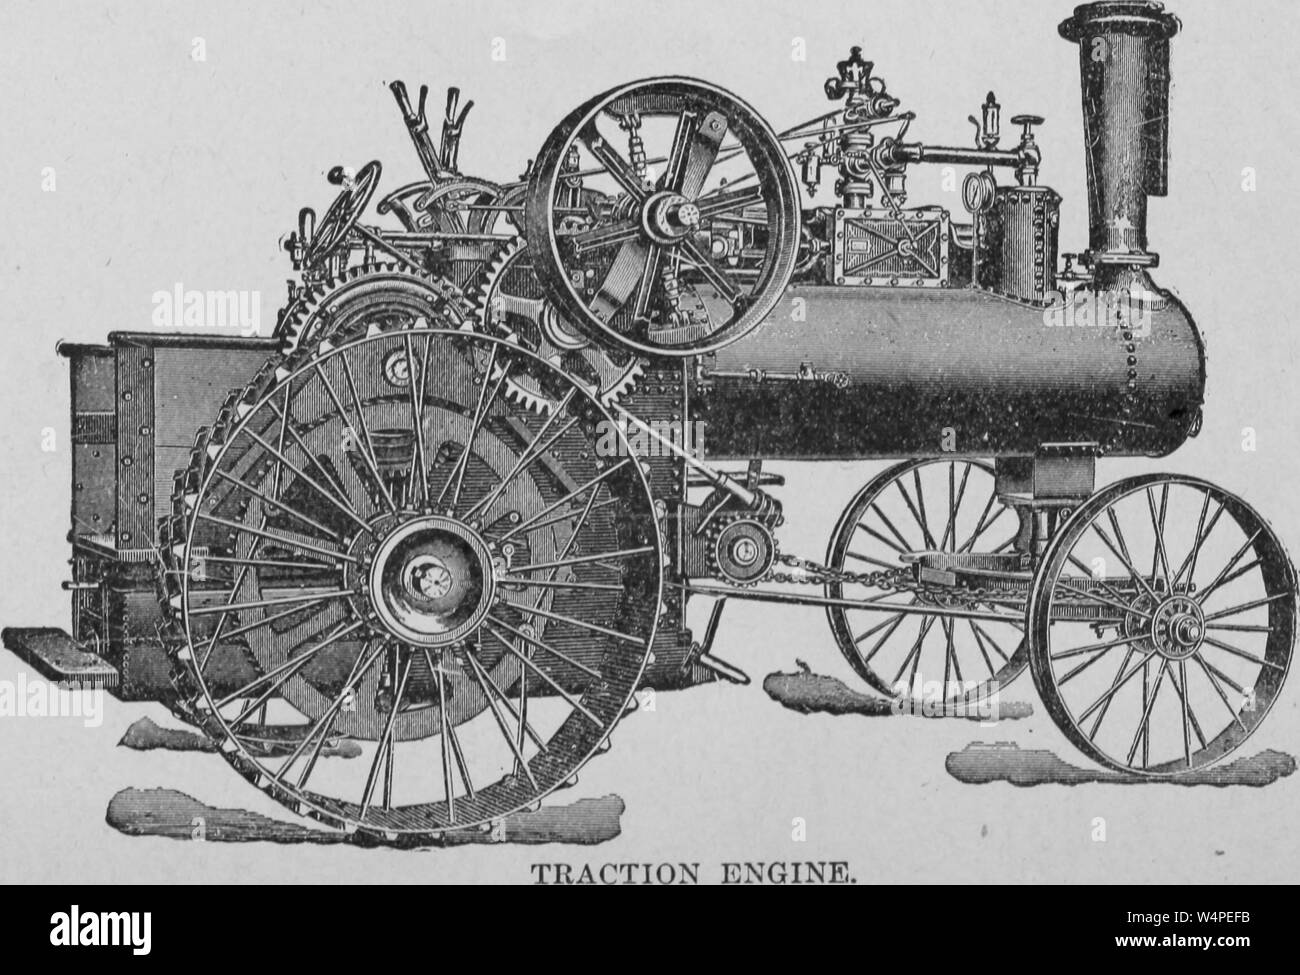 Engraving of the J. I, 1910. Case steam traction engine, from the book 'Farm engines and how to run them' by James H. Stephenson. Courtesy Internet Archive. () Stock Photo